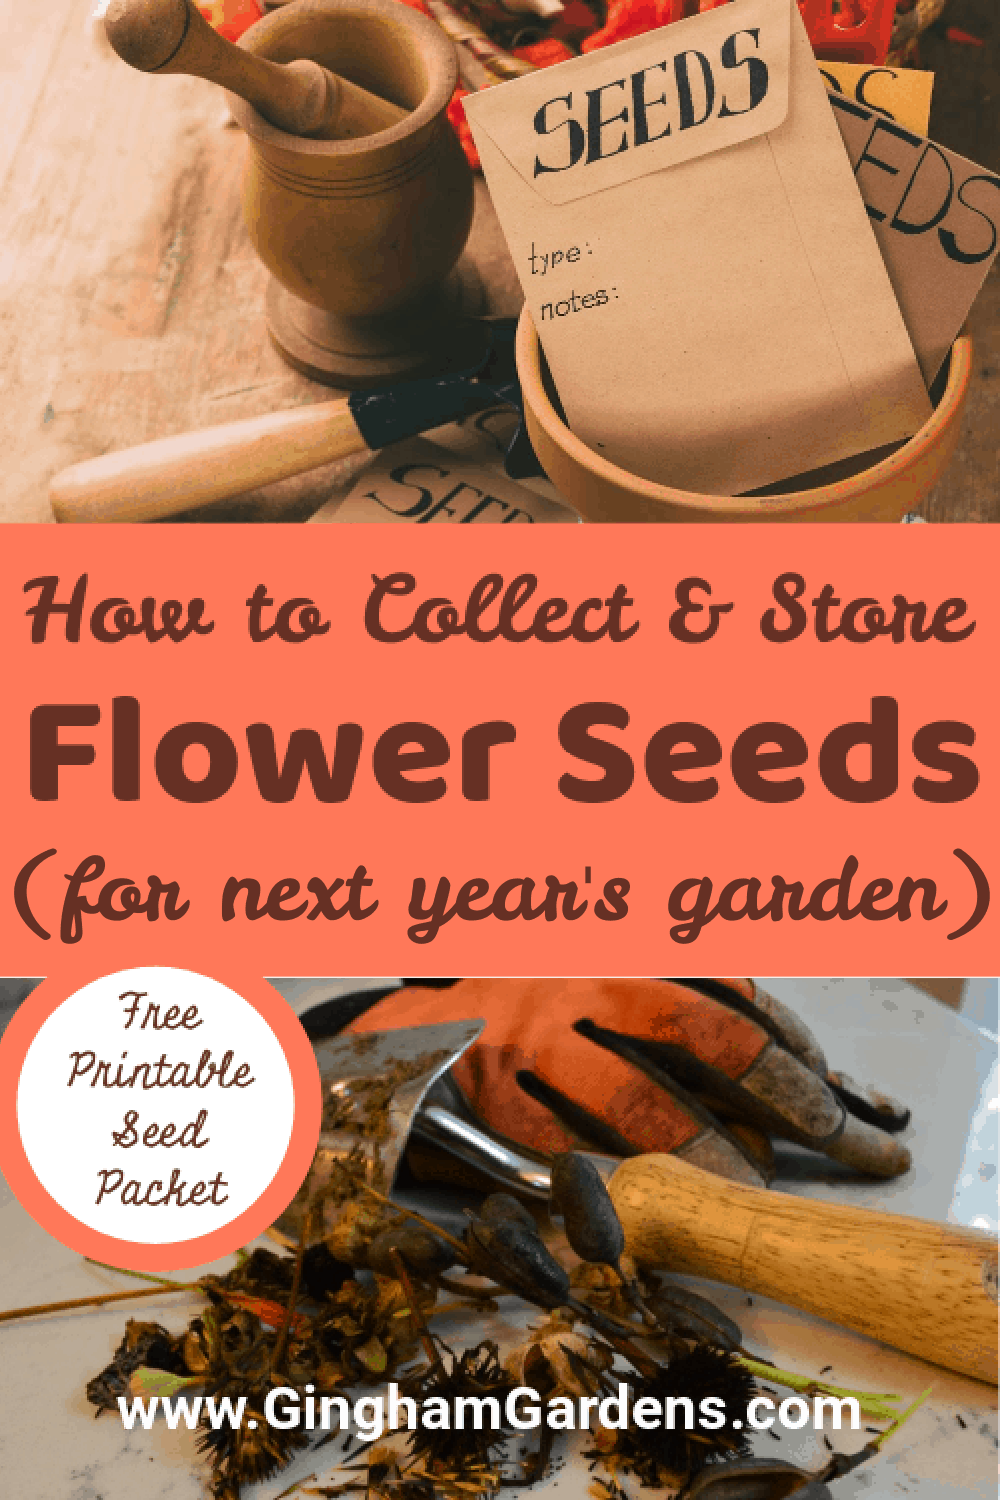 Images of Seeds with Text Overlay - How to Collect and Store Flower Seeds